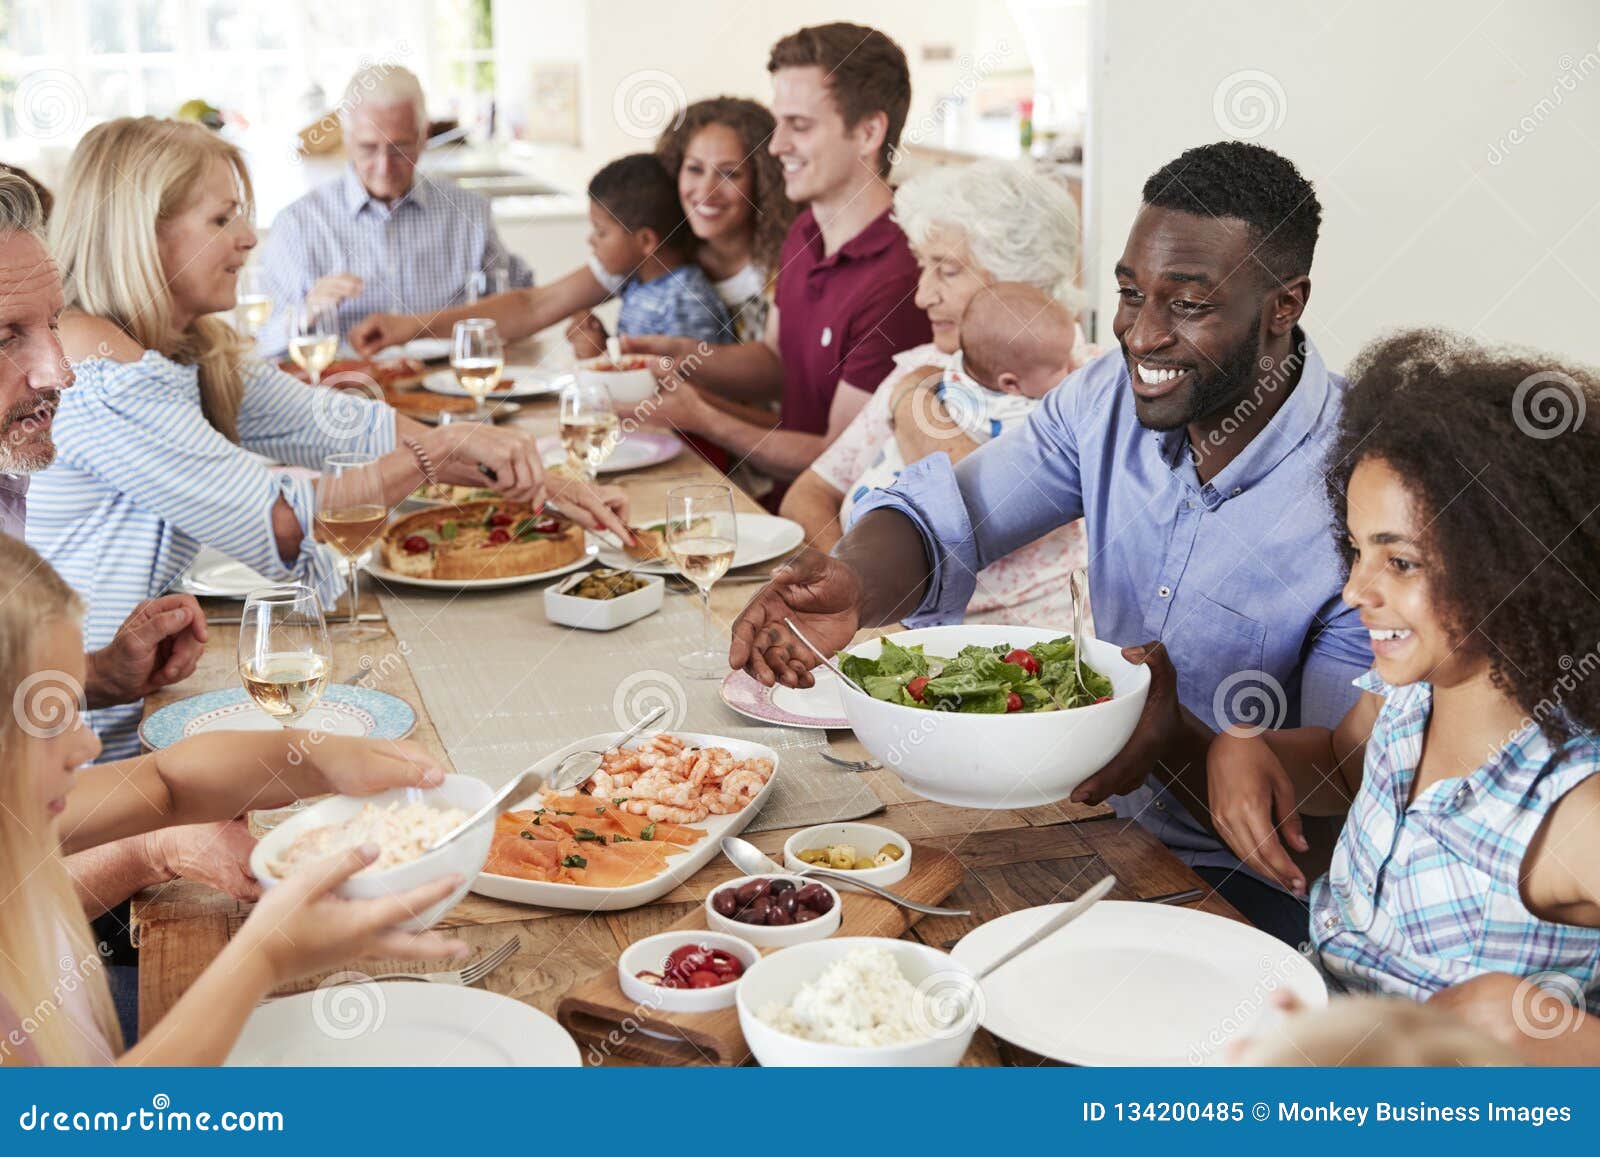 group of multi-generation family and friends sitting around table and enjoying meal